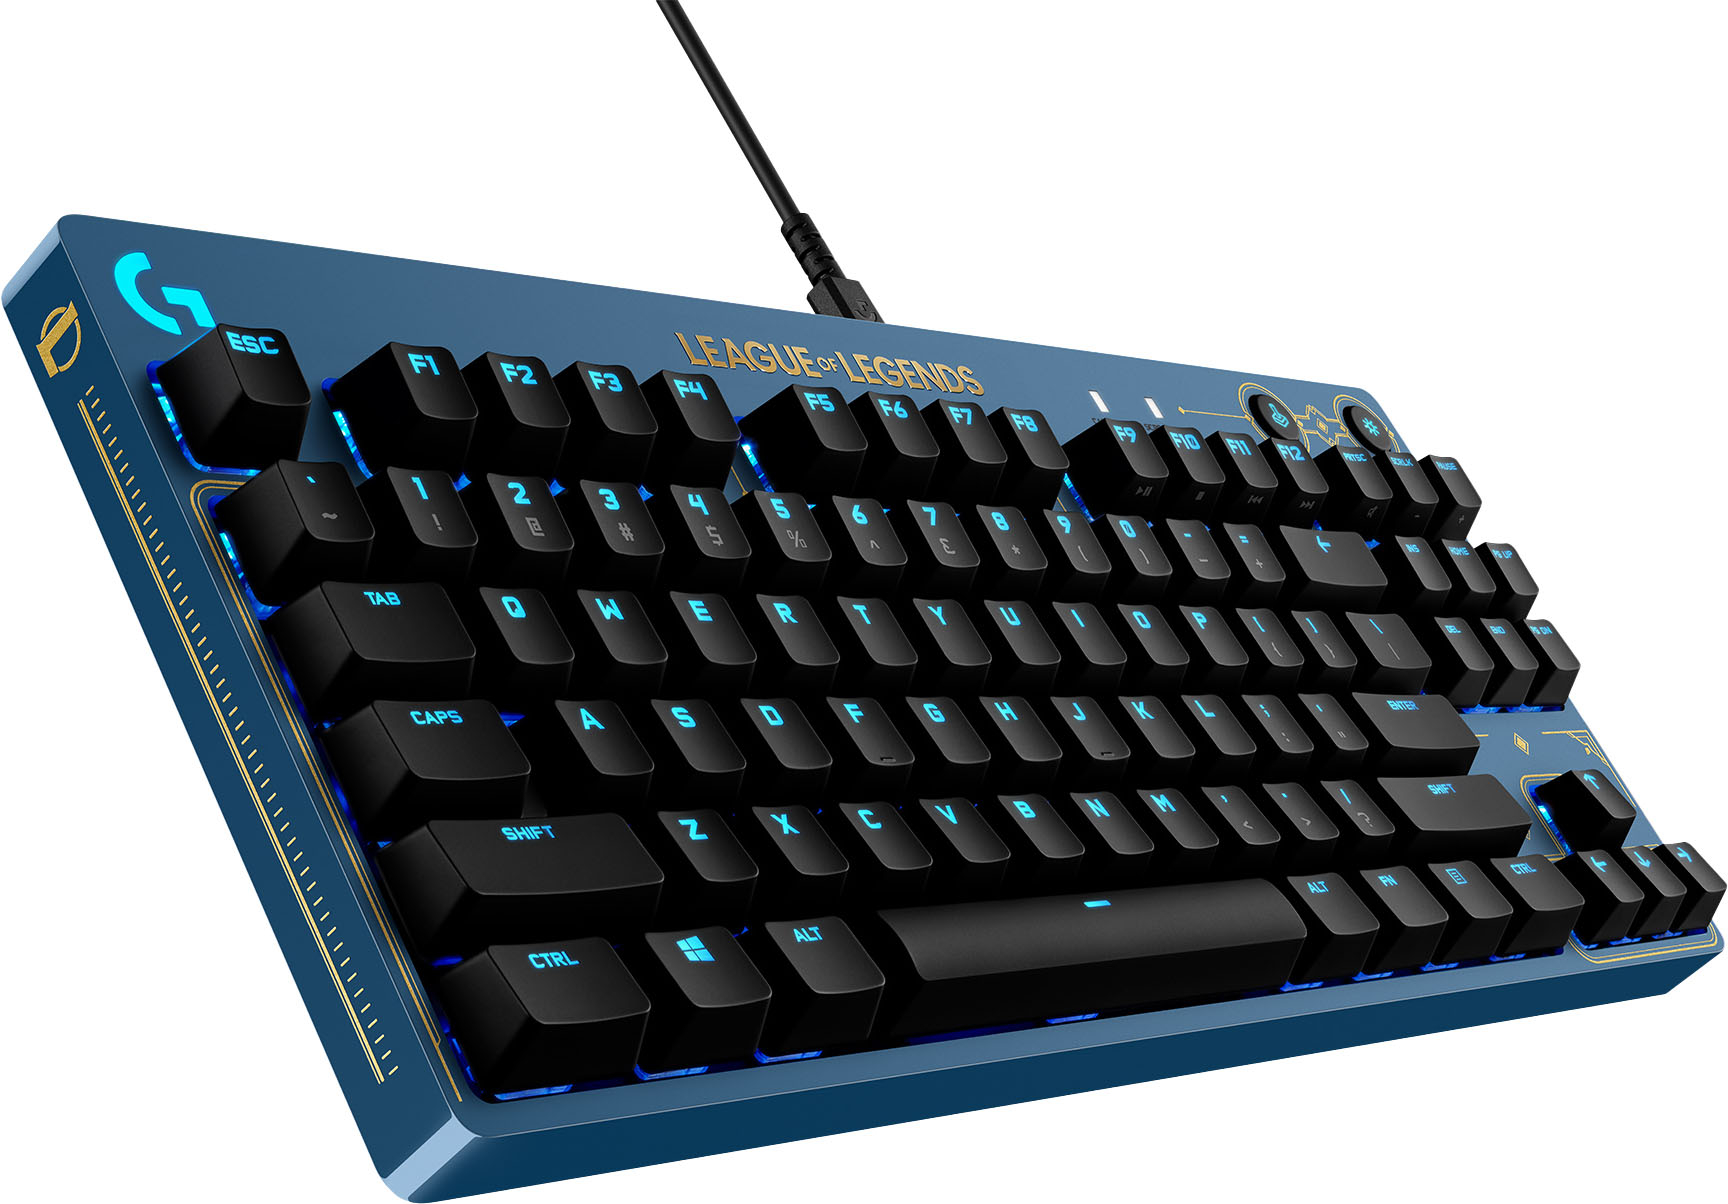 Logitech G Pro Keyboard League of Legends Edition against a white background